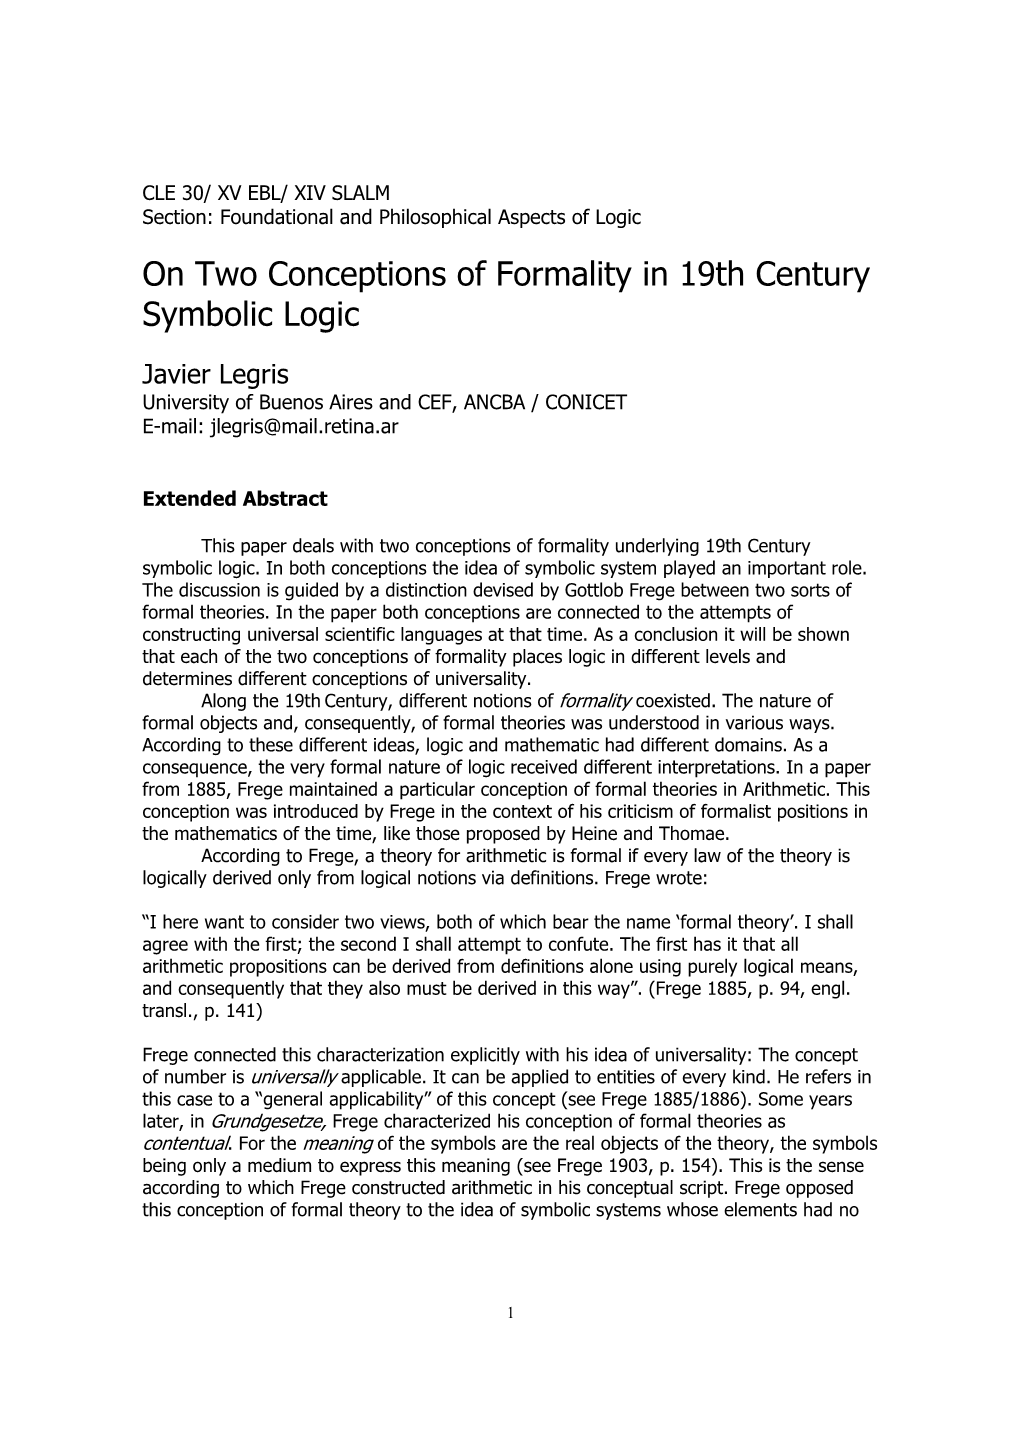 On Two Conceptions of Formality in 19Th Century Symbolic Logic